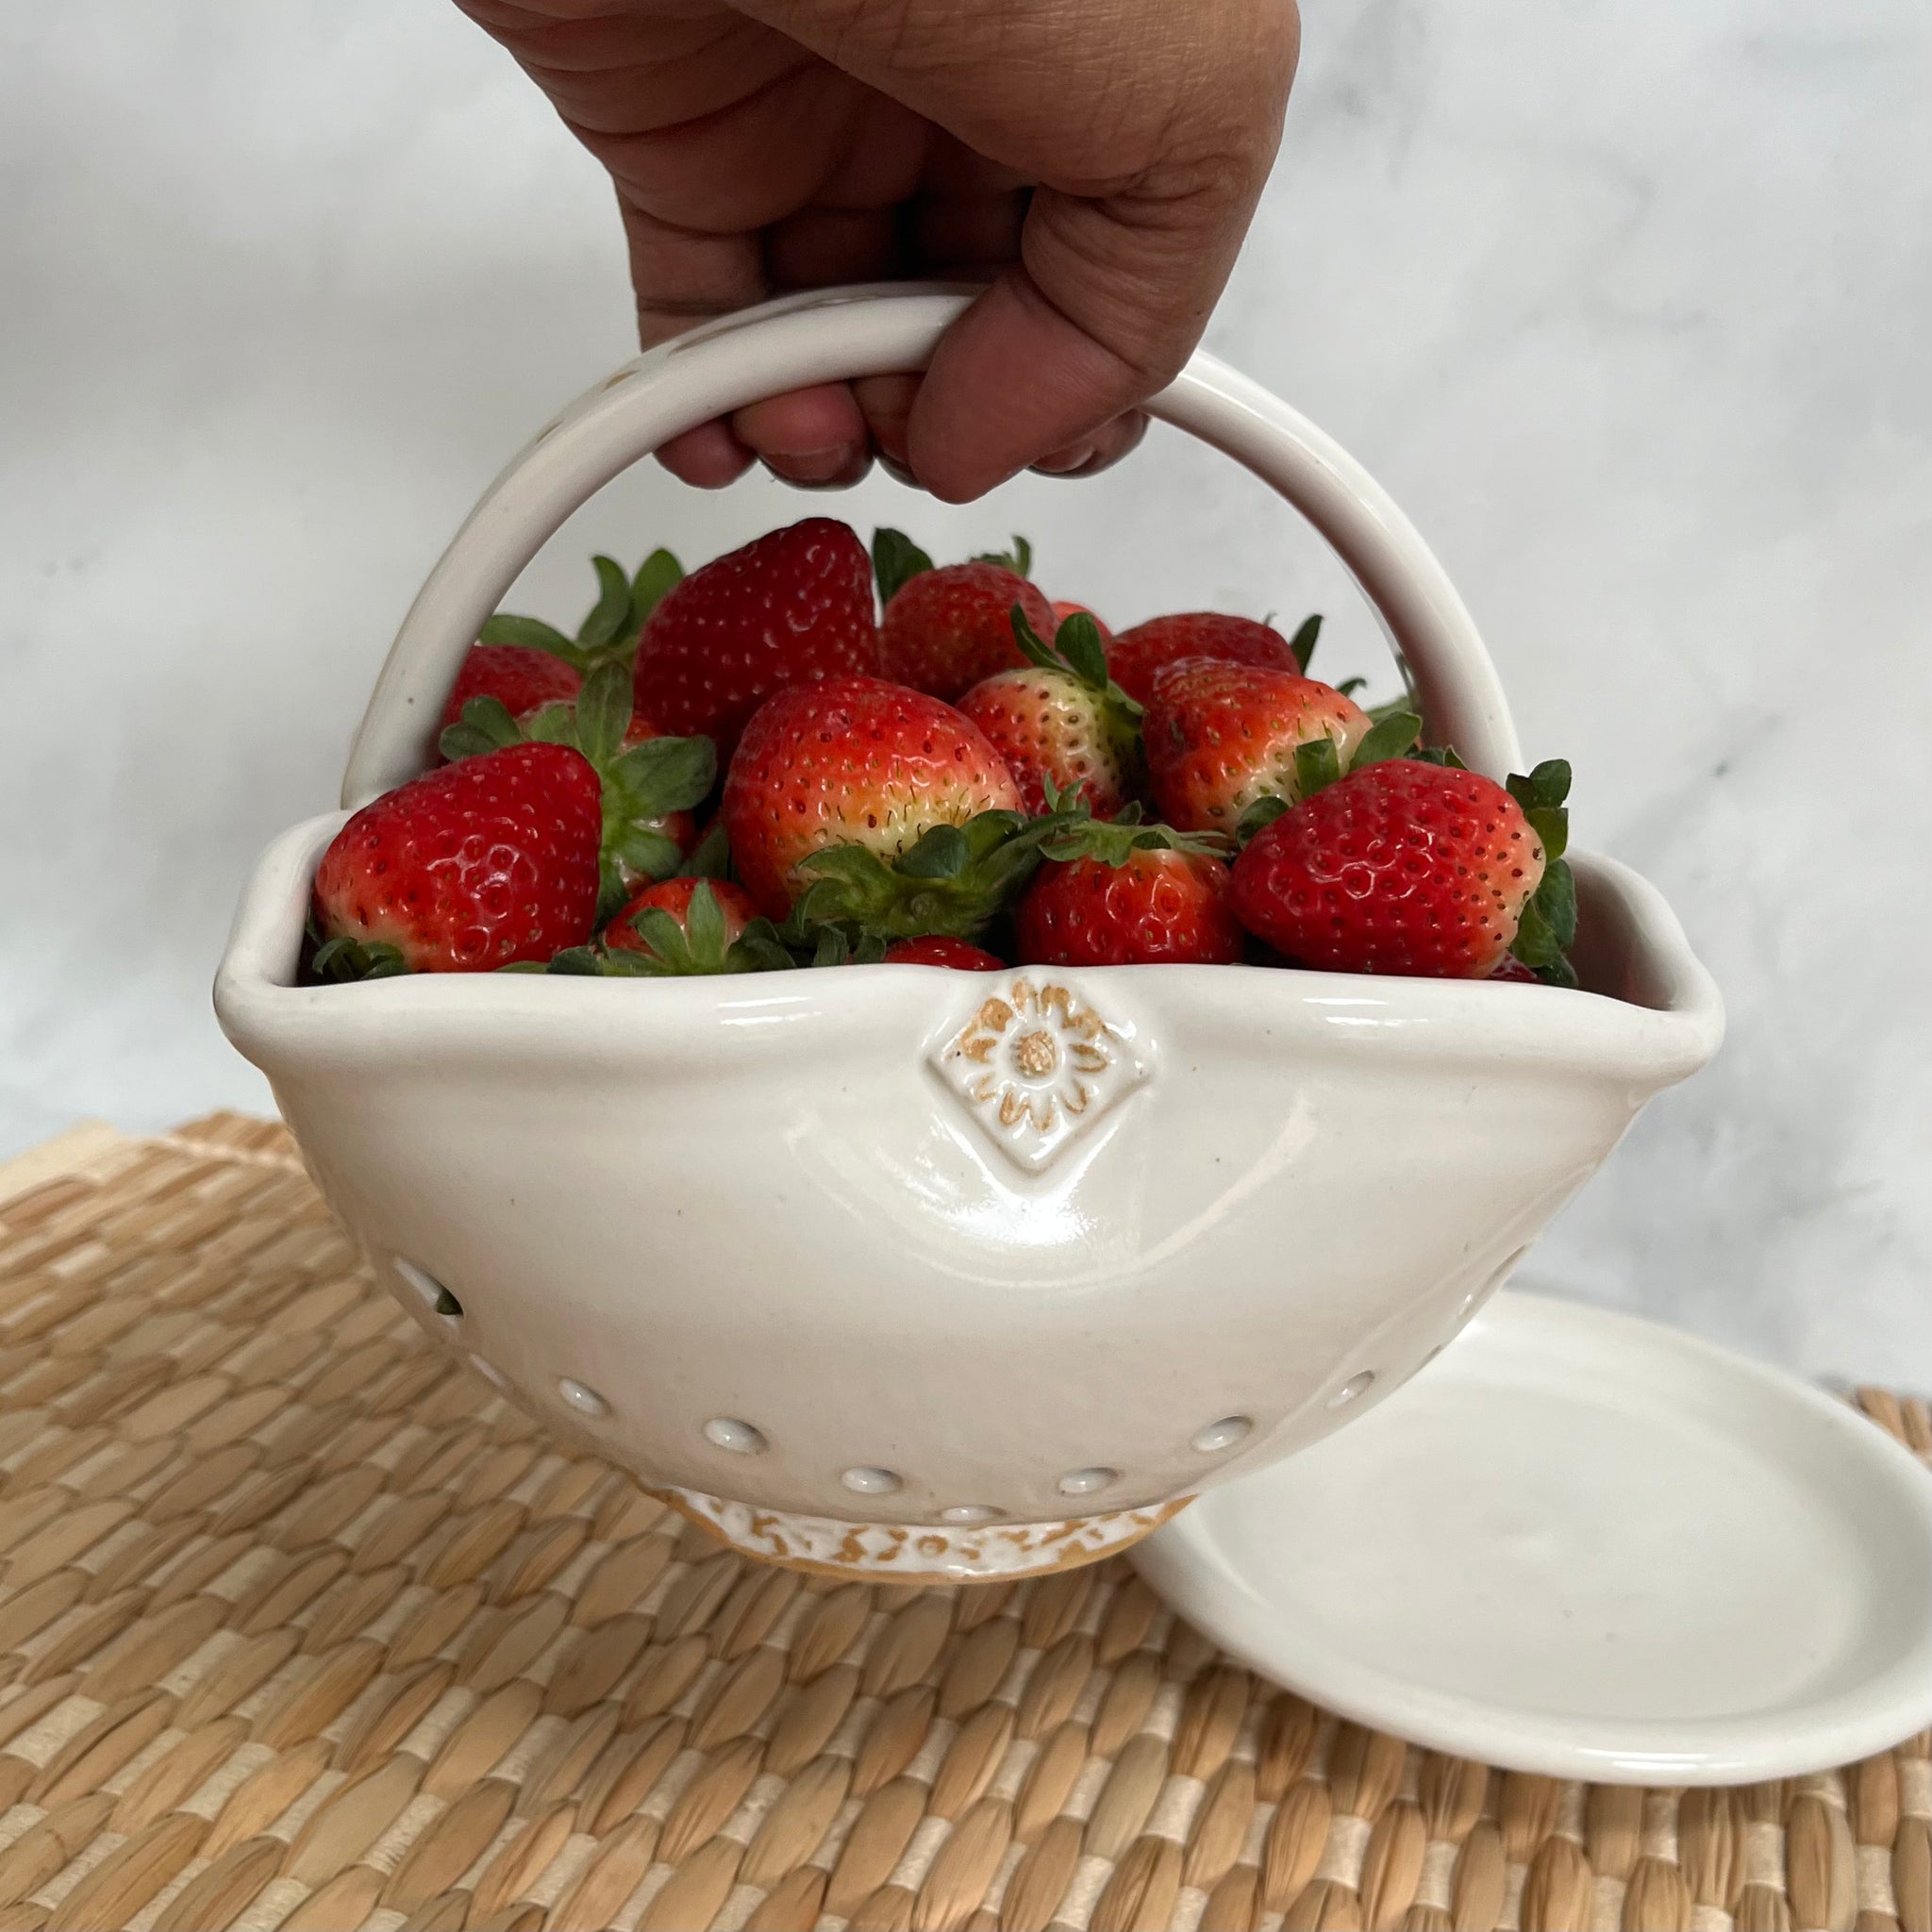 BBB2 White Berry Basket Bowl with Floral Accents - Square Shape